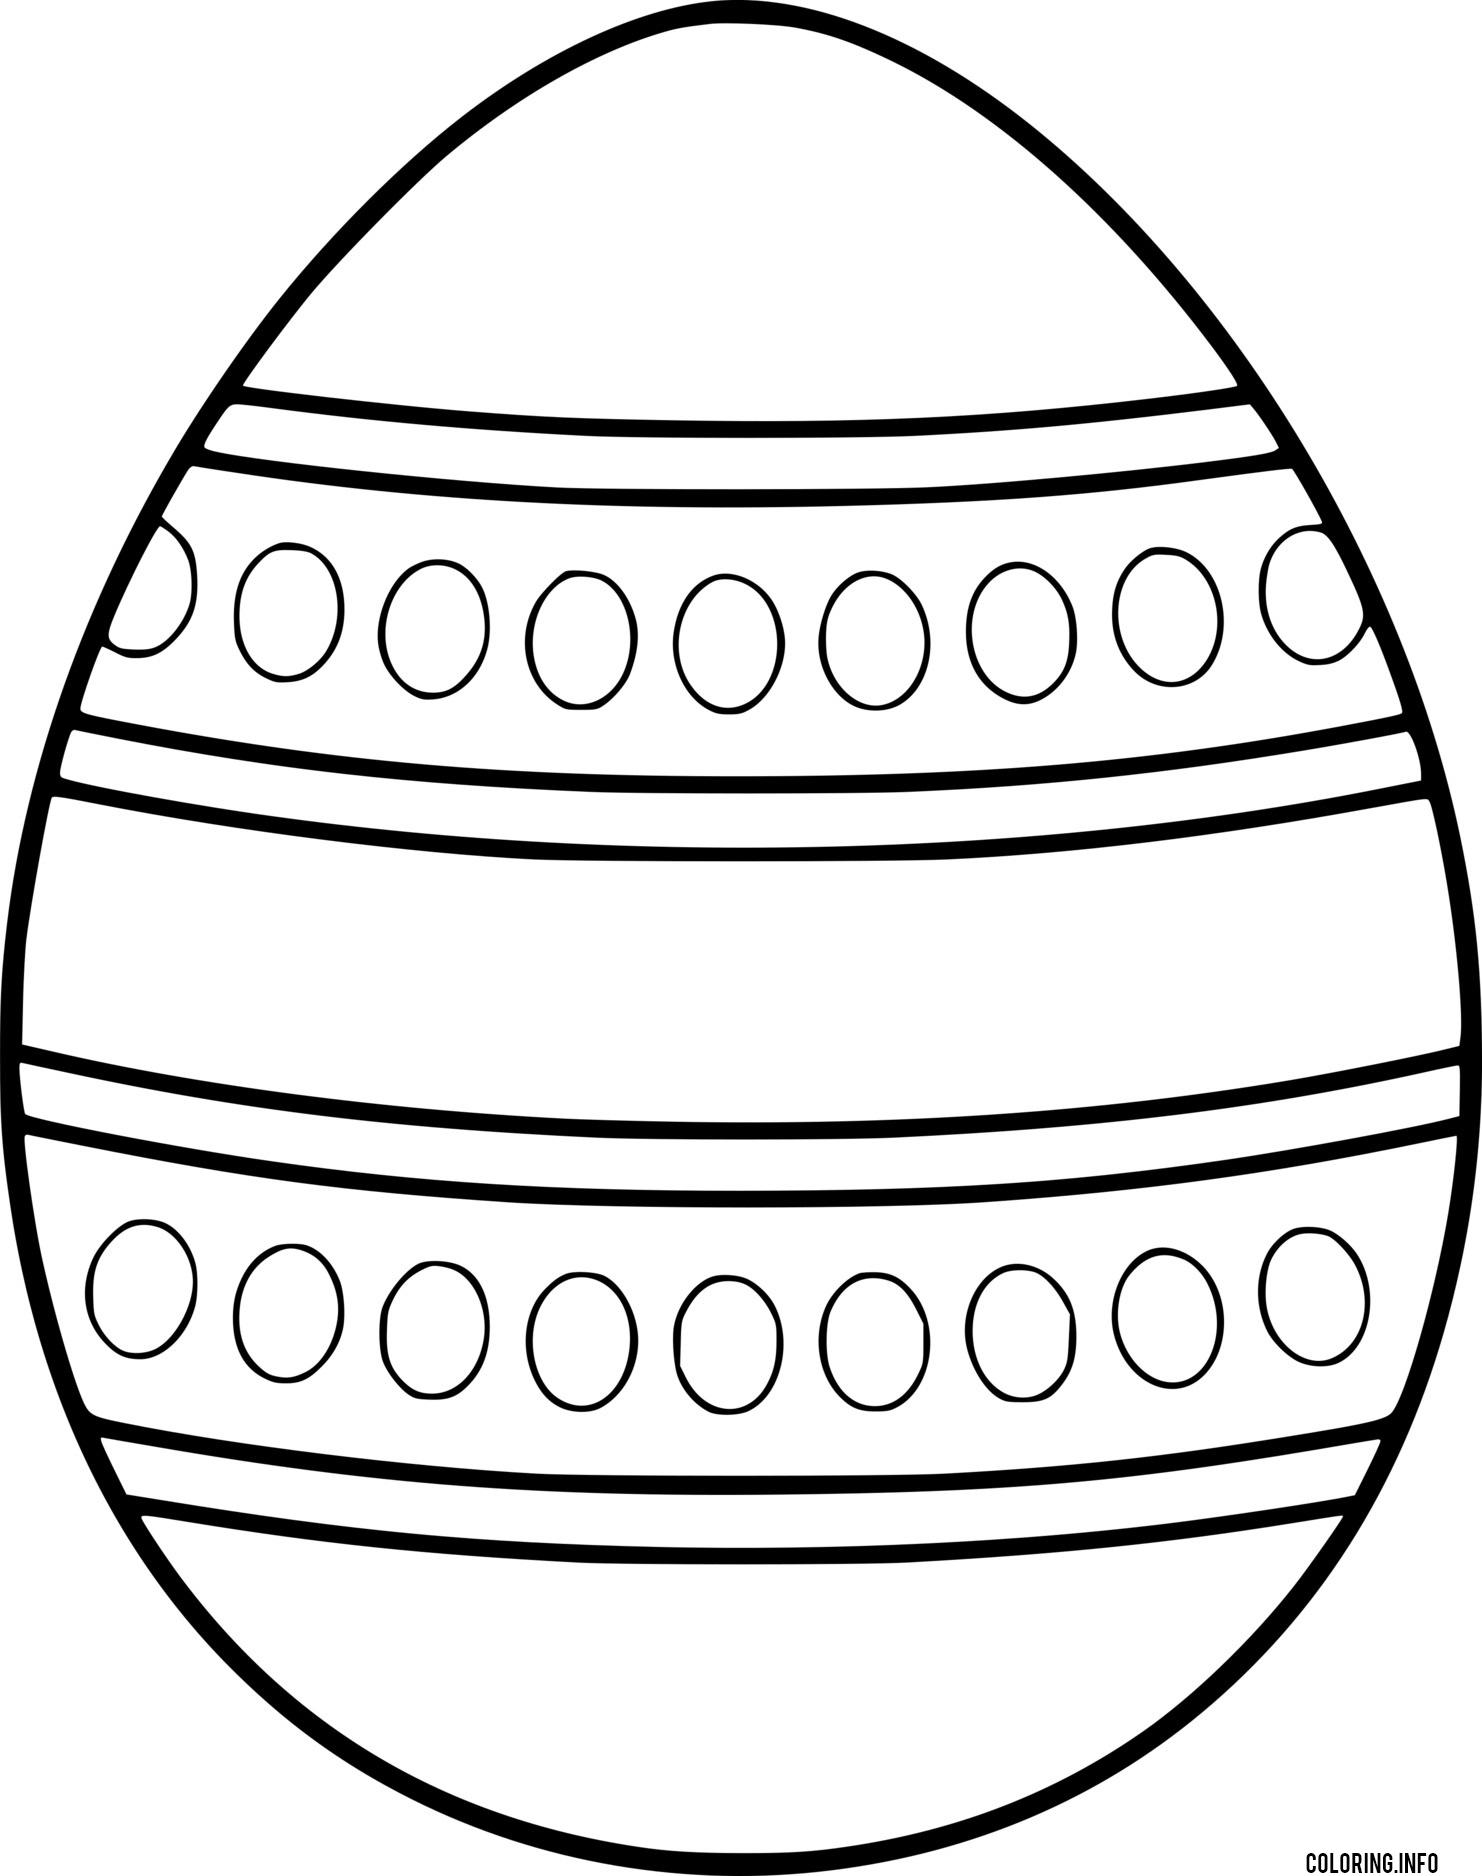 Easter Egg With Line And Circle Patterns coloring